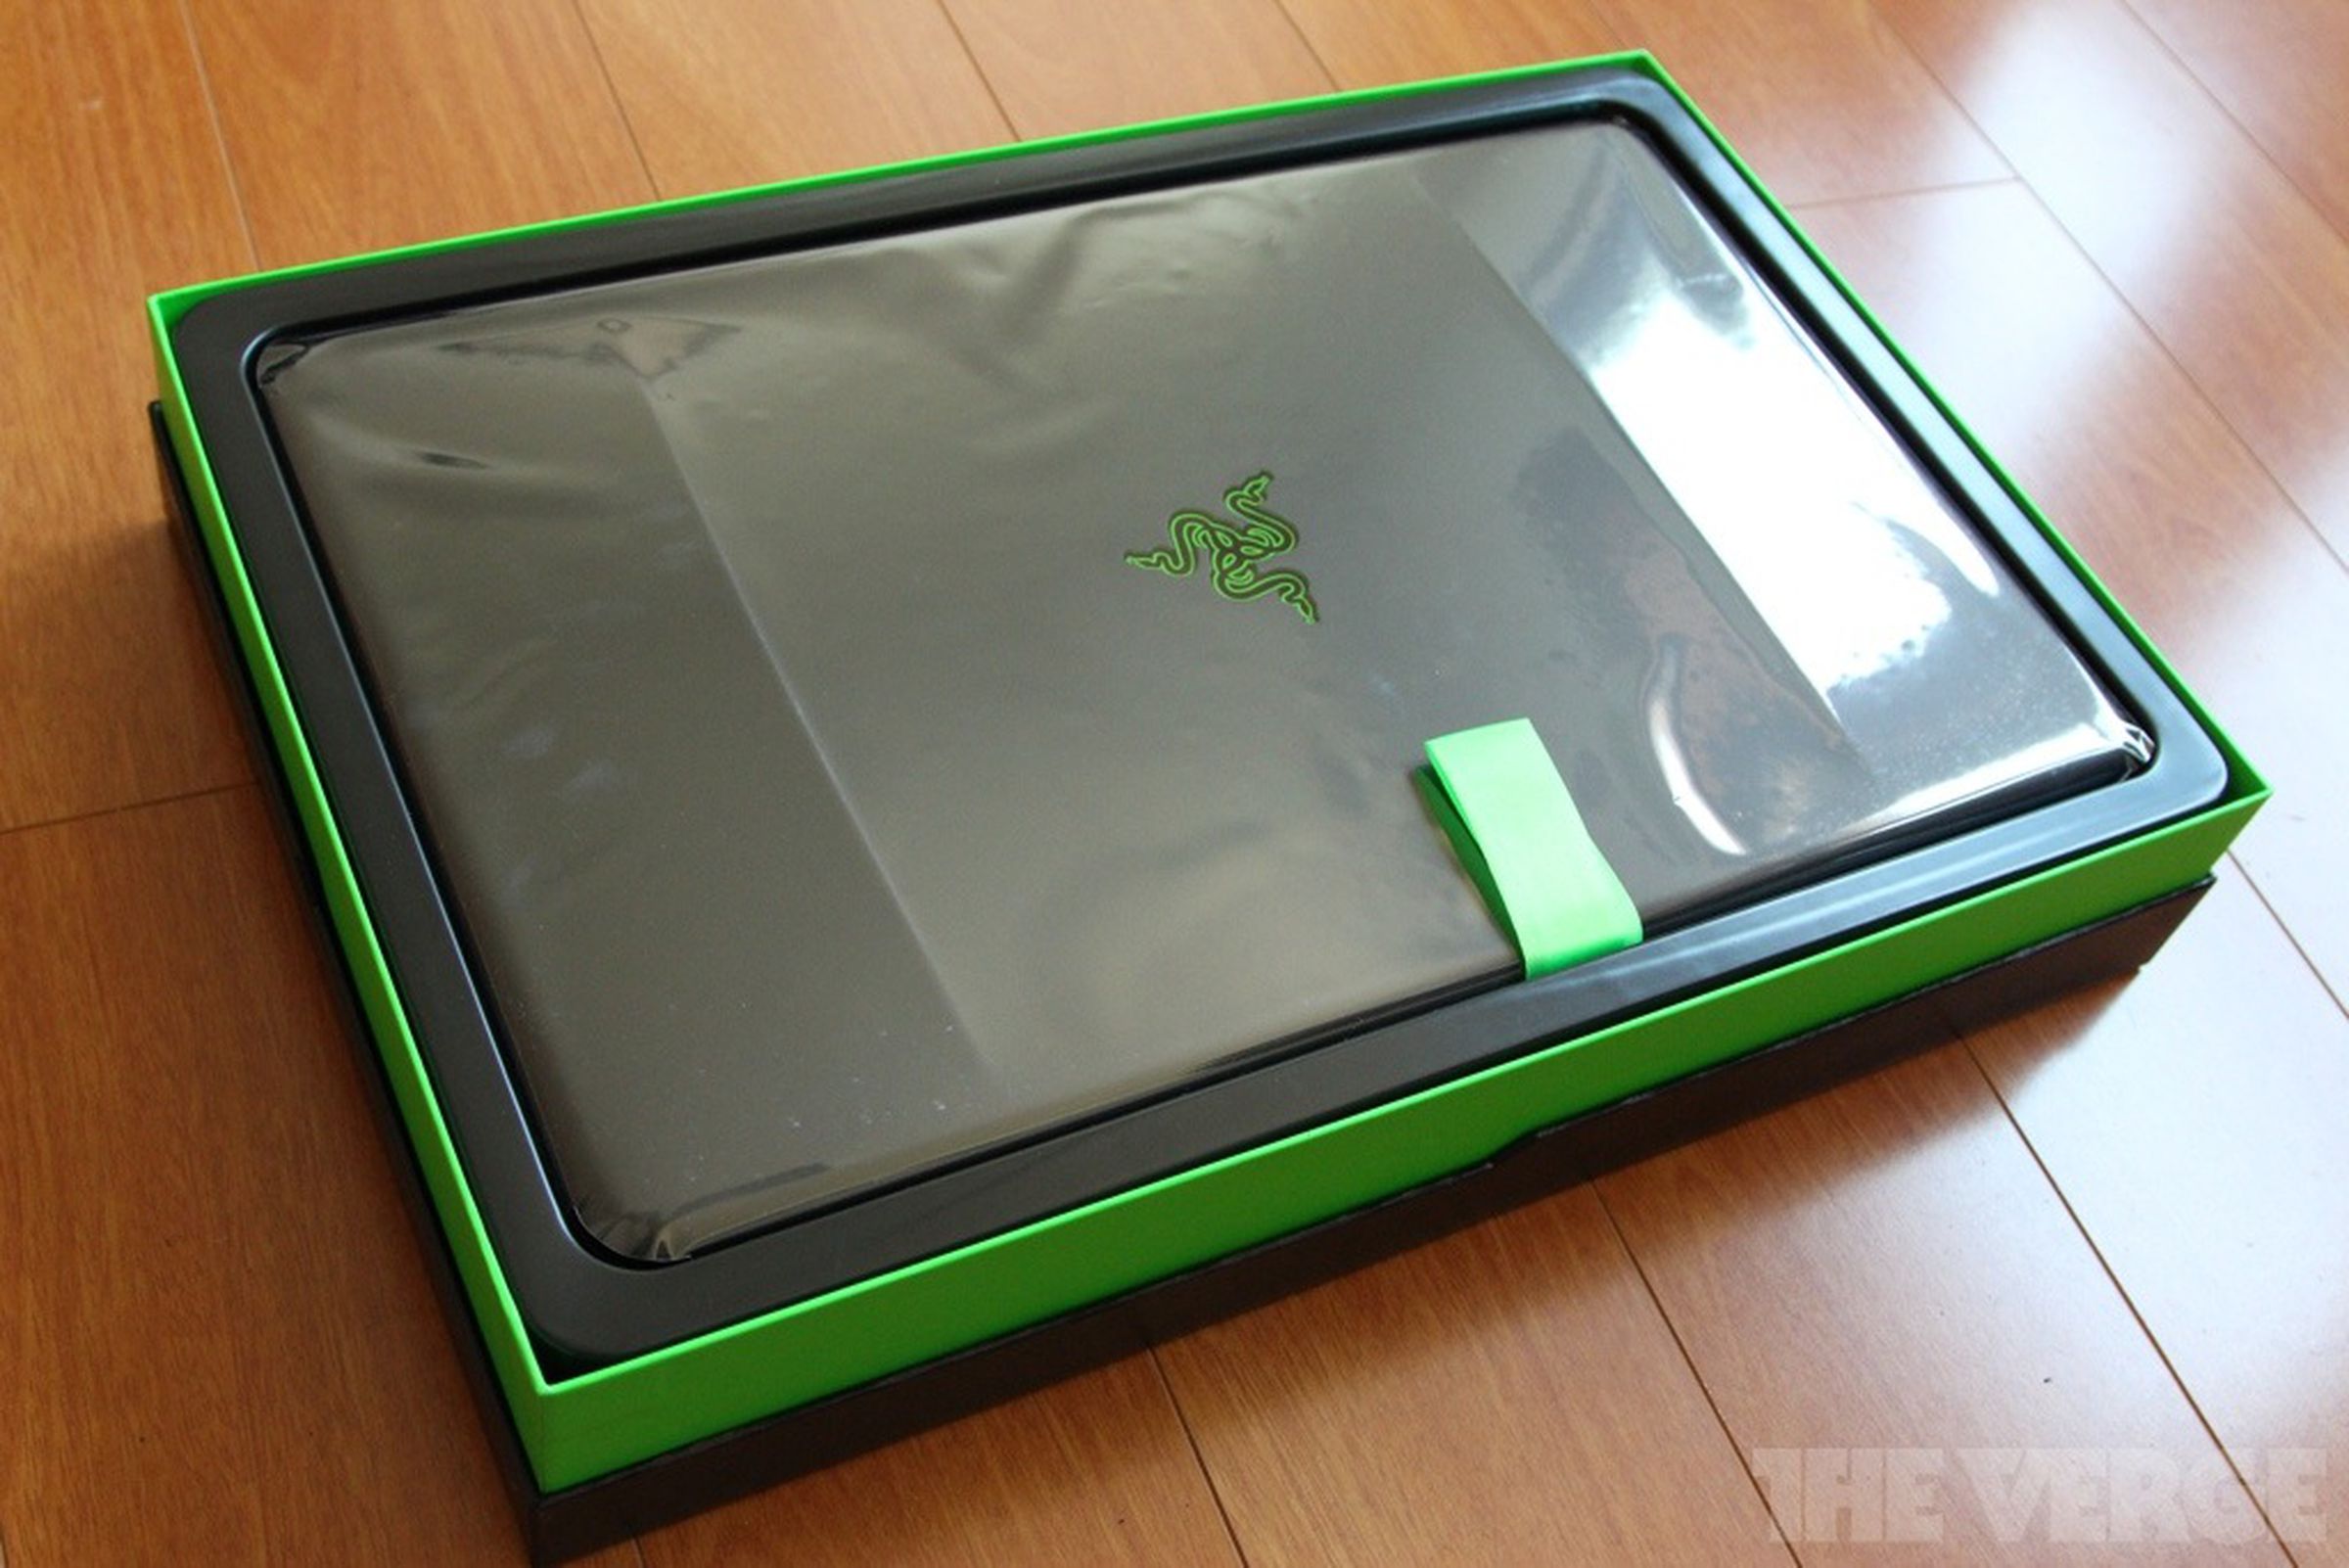 Razer Blade (late 2012) review pictures